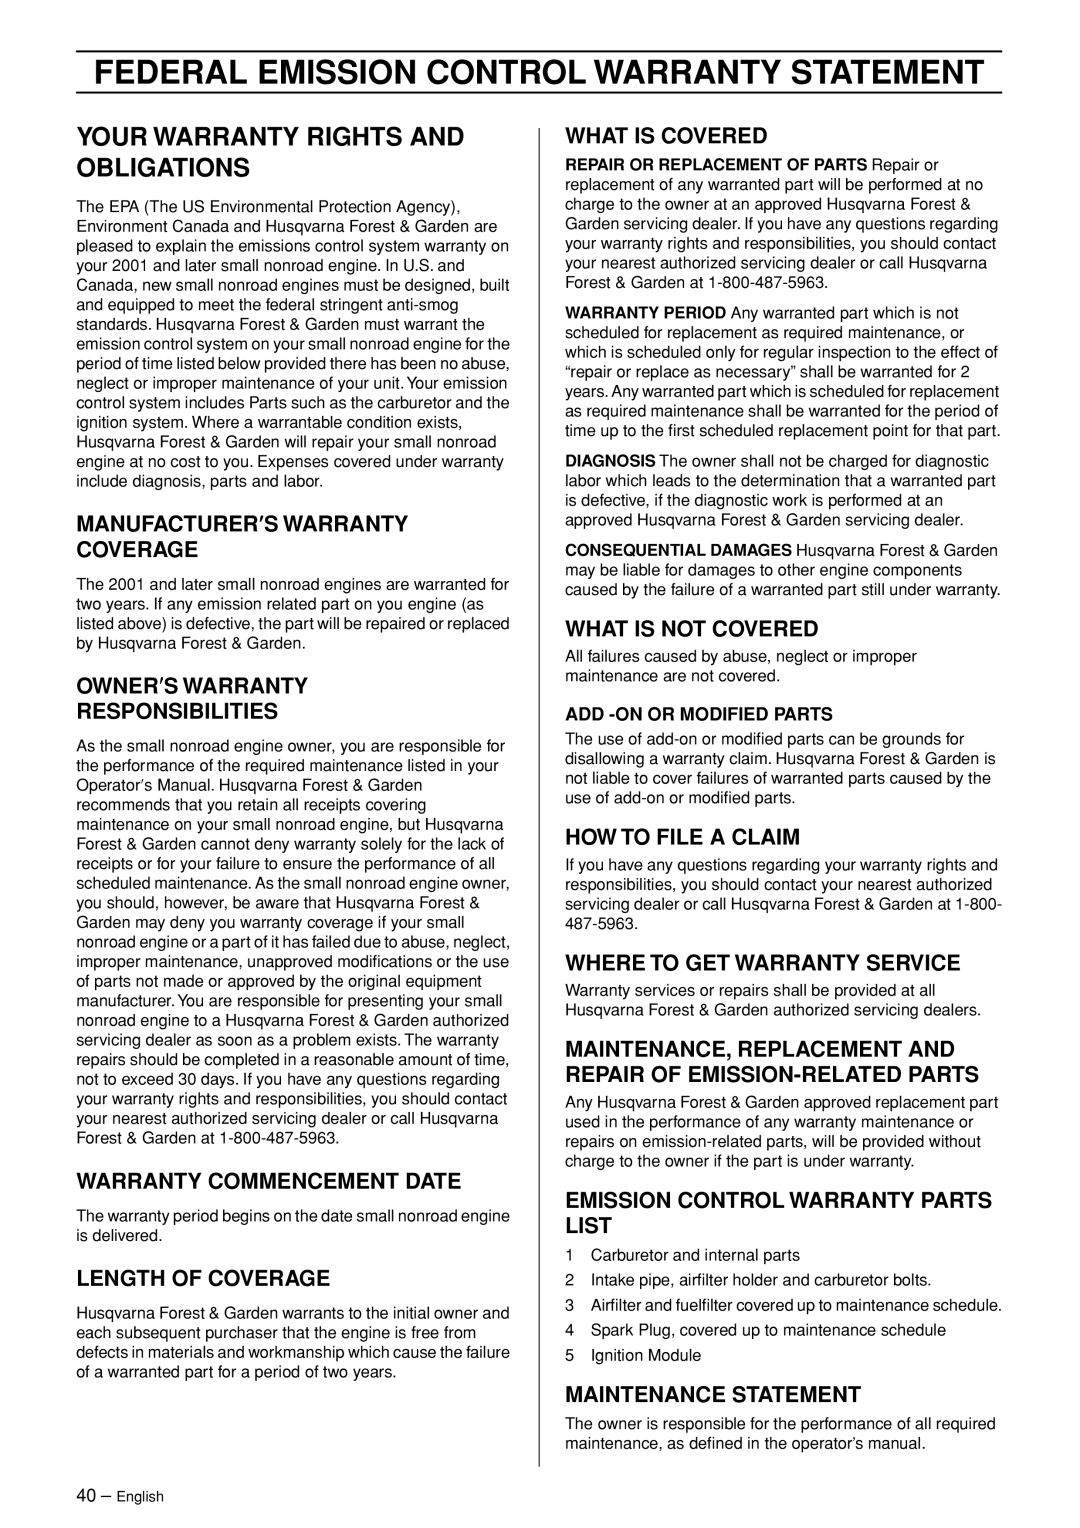 Husqvarna 460, 455e Federal Emission Control Warranty Statement, Your Warranty Rights And Obligations, Length Of Coverage 